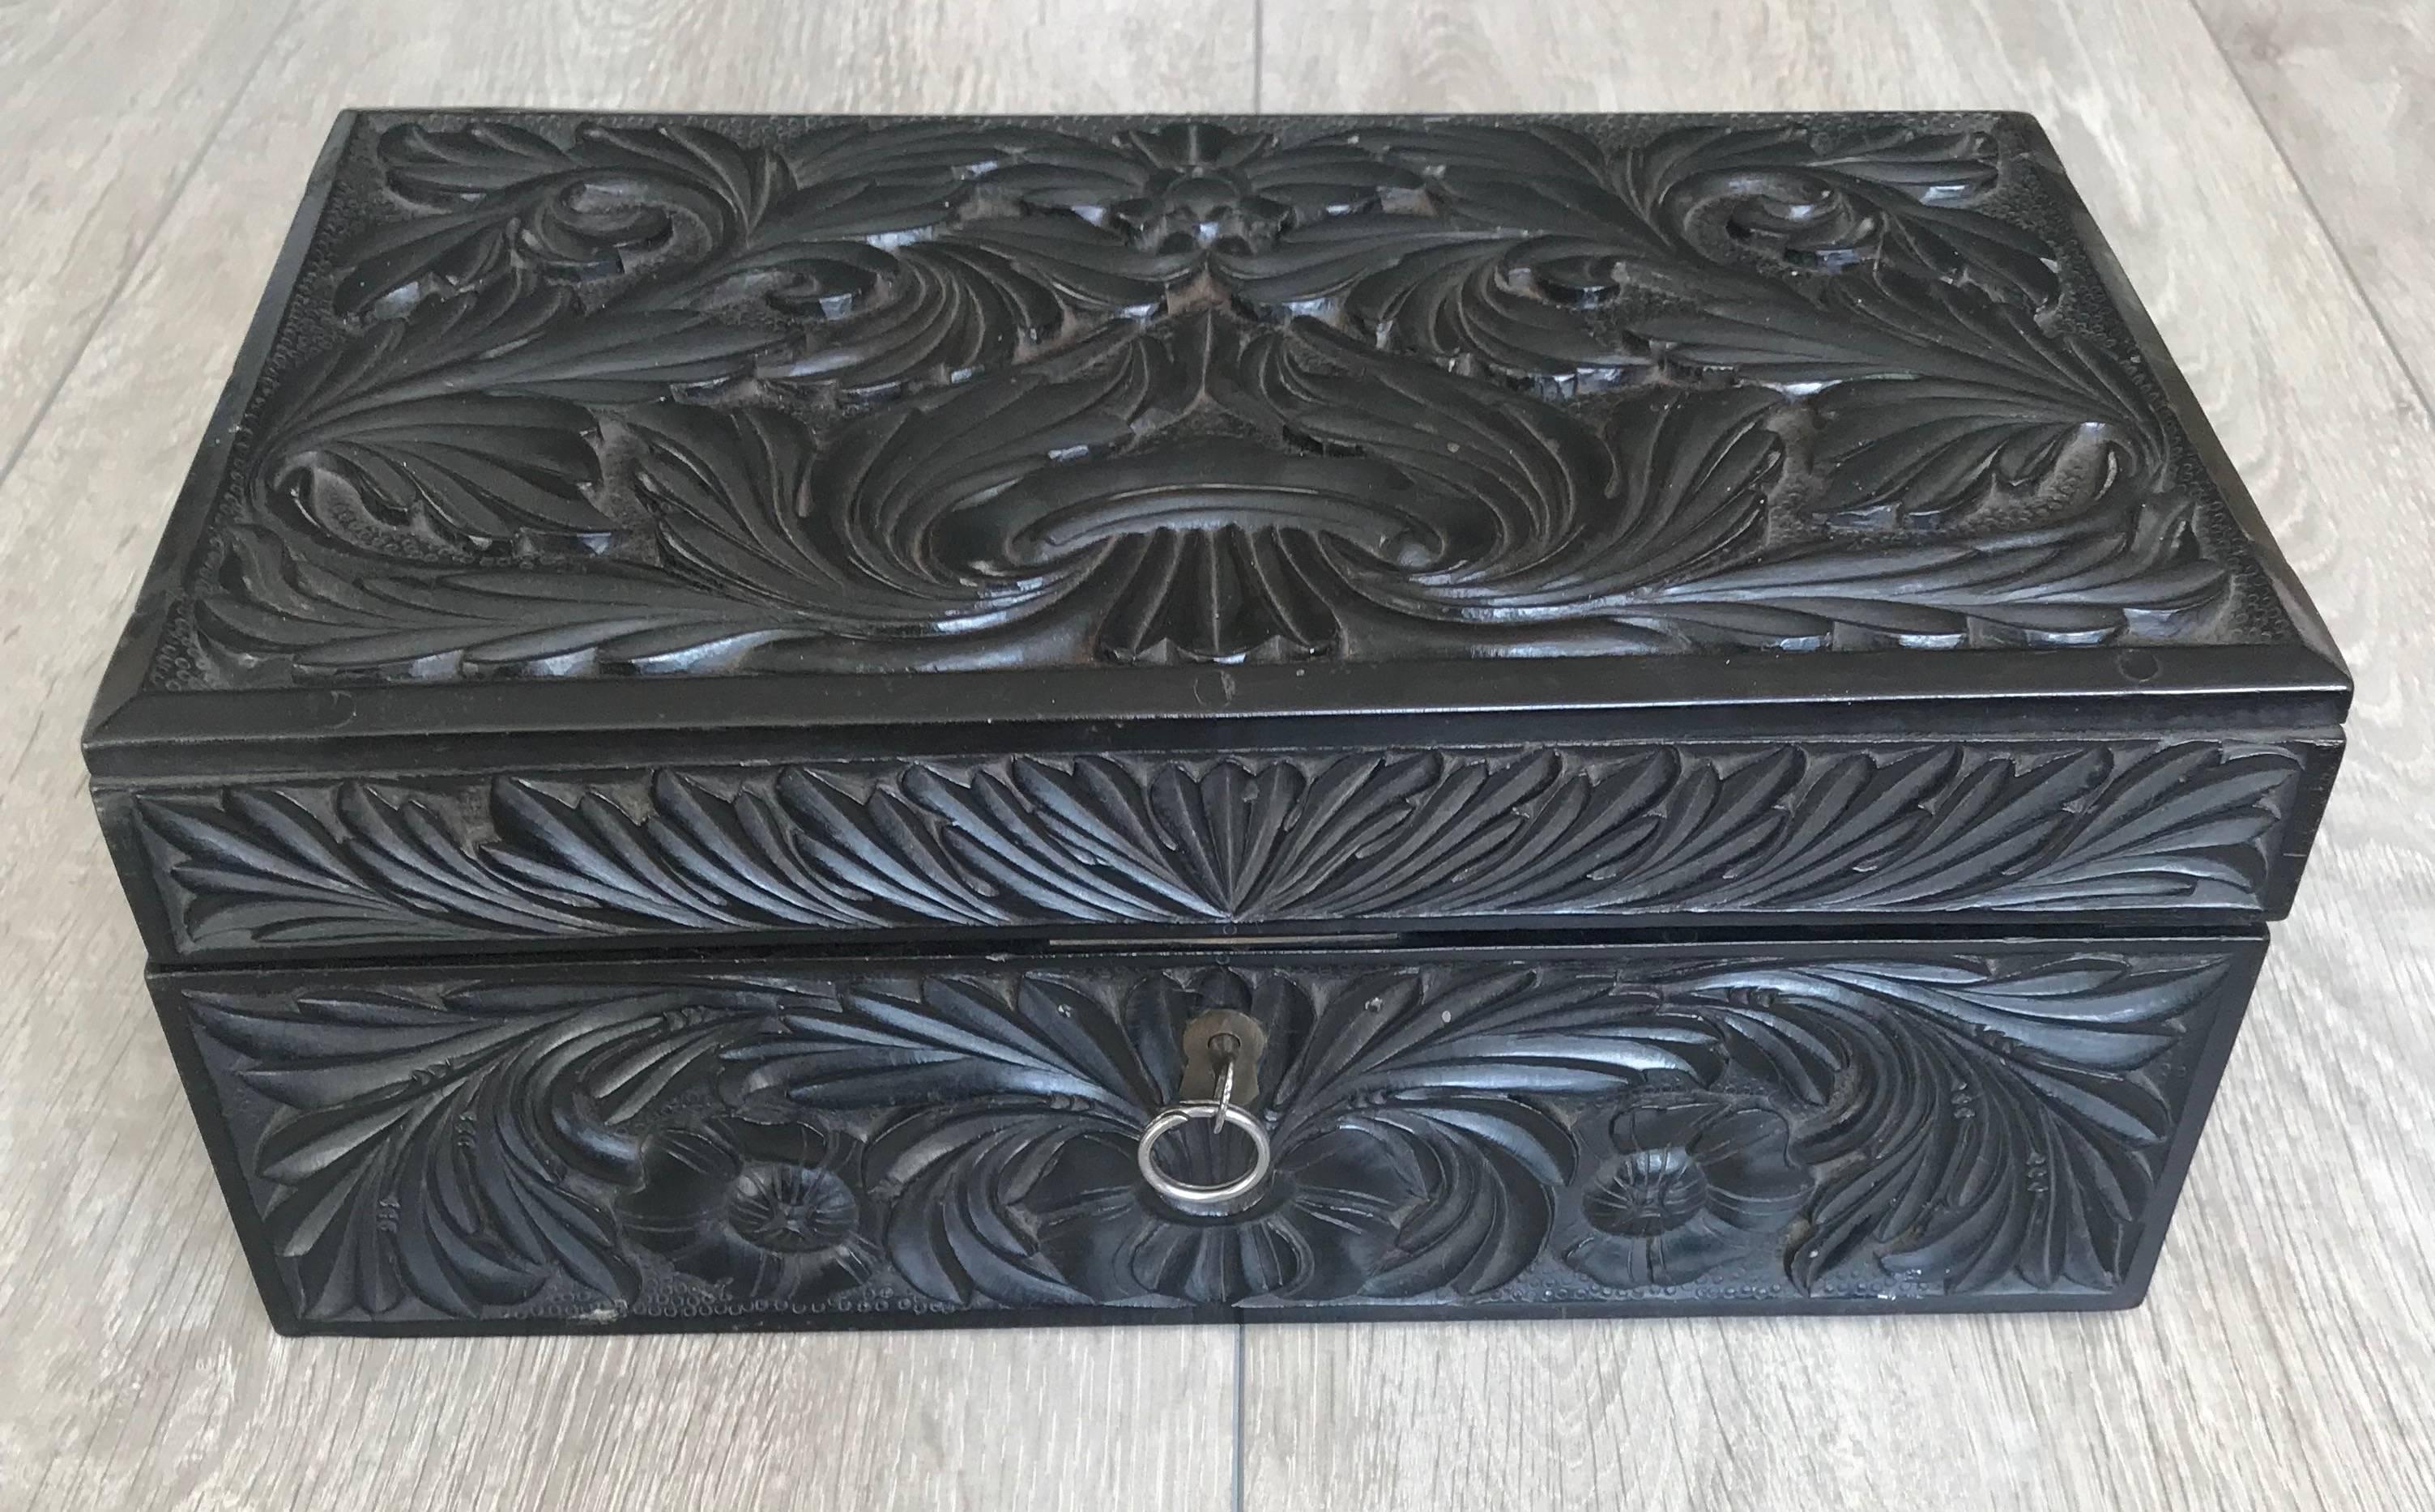 Rare Colonial era, all handcrafted darkwood box.

The deep and perfectly symmetrical flowers and leafs on all sides of this marvelous box are extra impressive when we take into account that they are all hand-carved out of one of the hardest woods on